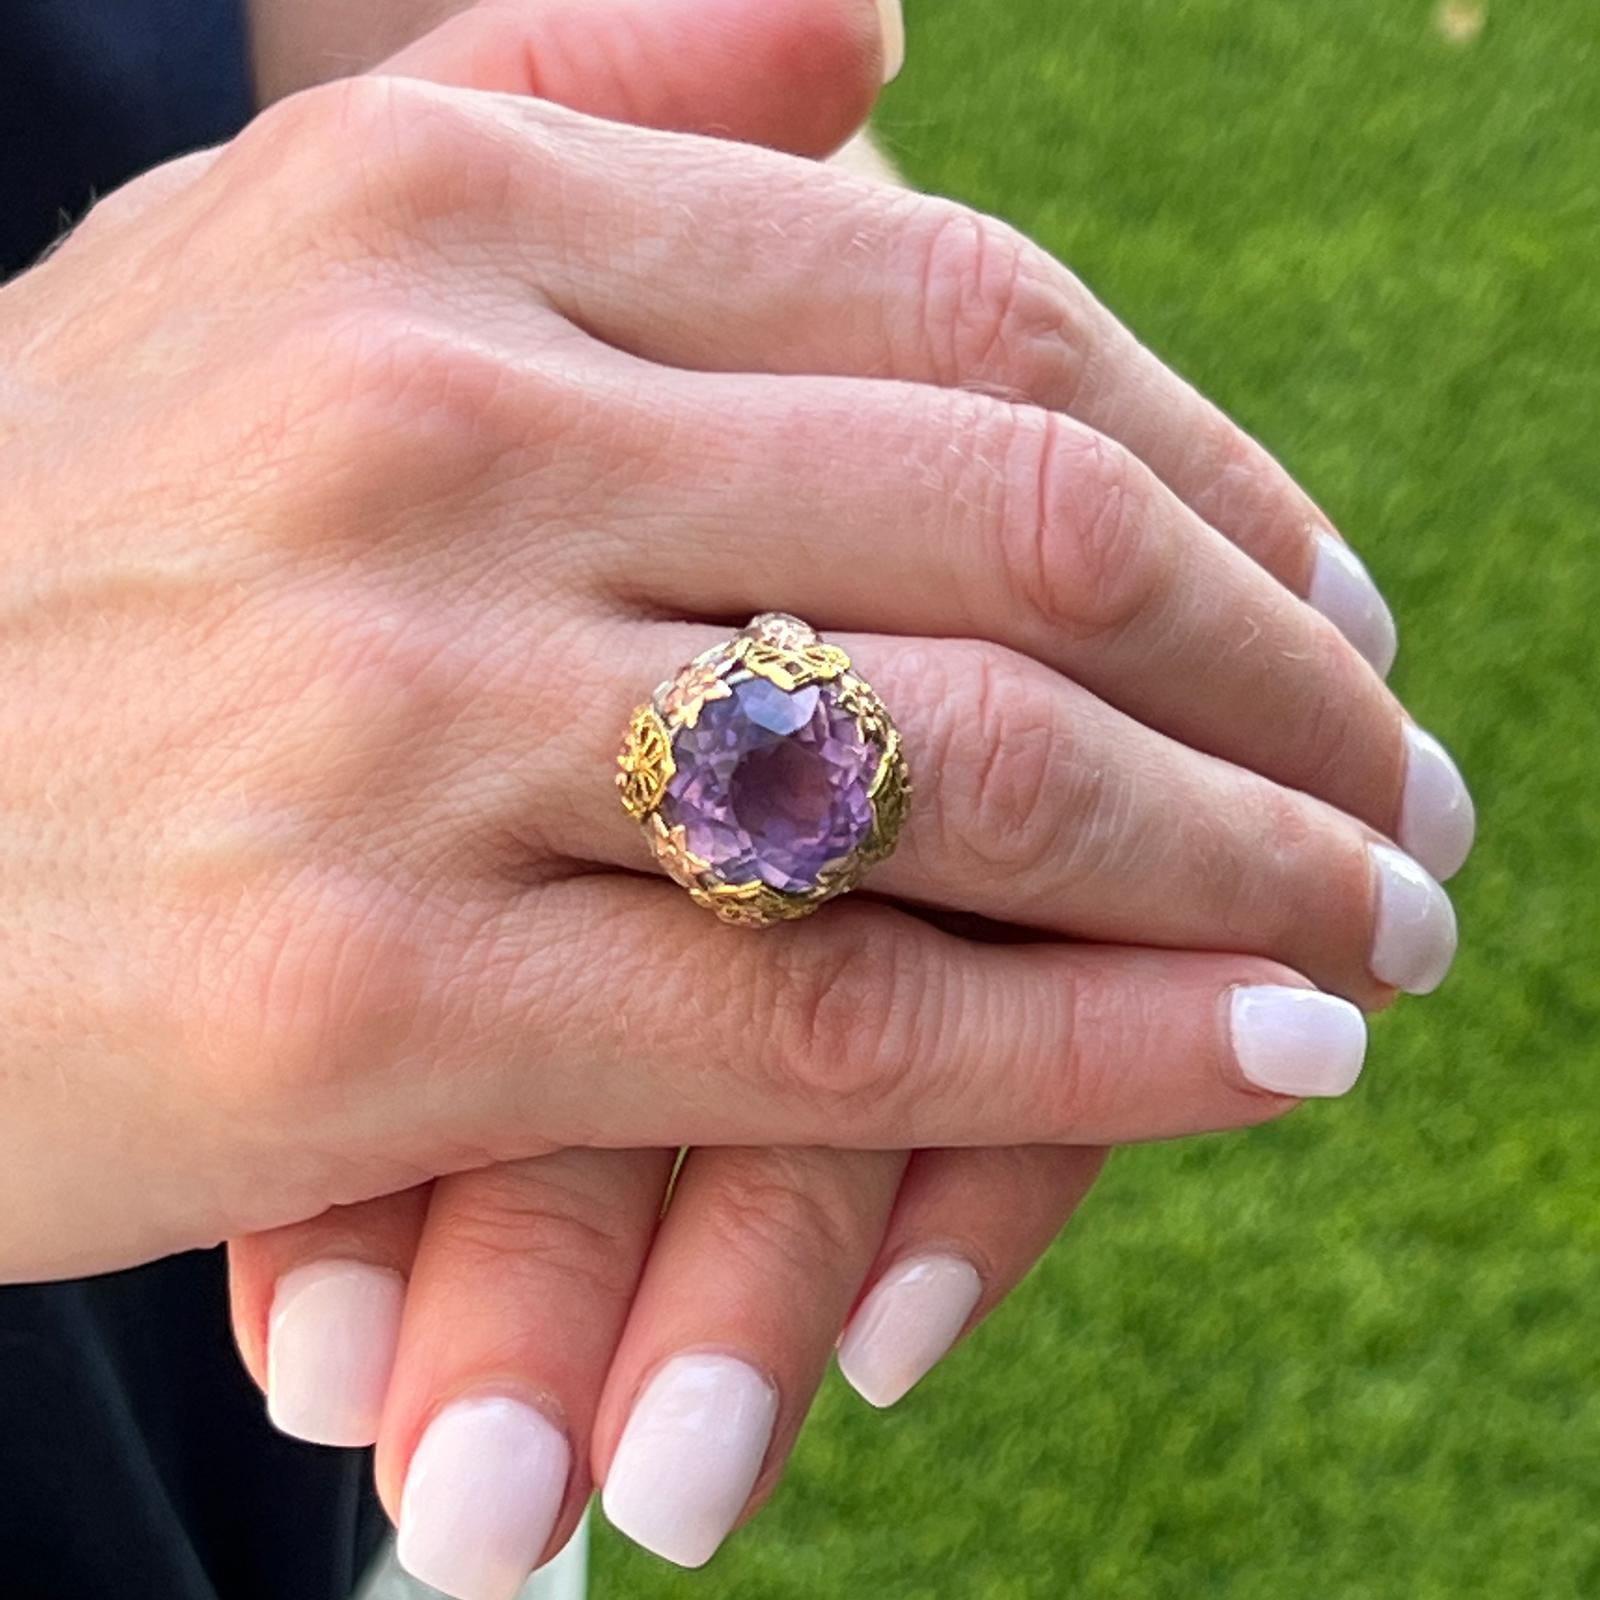 Beautiful vintage amethyst cocktail ring handcrafted in 14 karat rose, white, and yellow gold. The tri-color gold mounting features a floral motif and is set with a round faceted natural amethyst gemstone. The ring measures 20mm on top and is